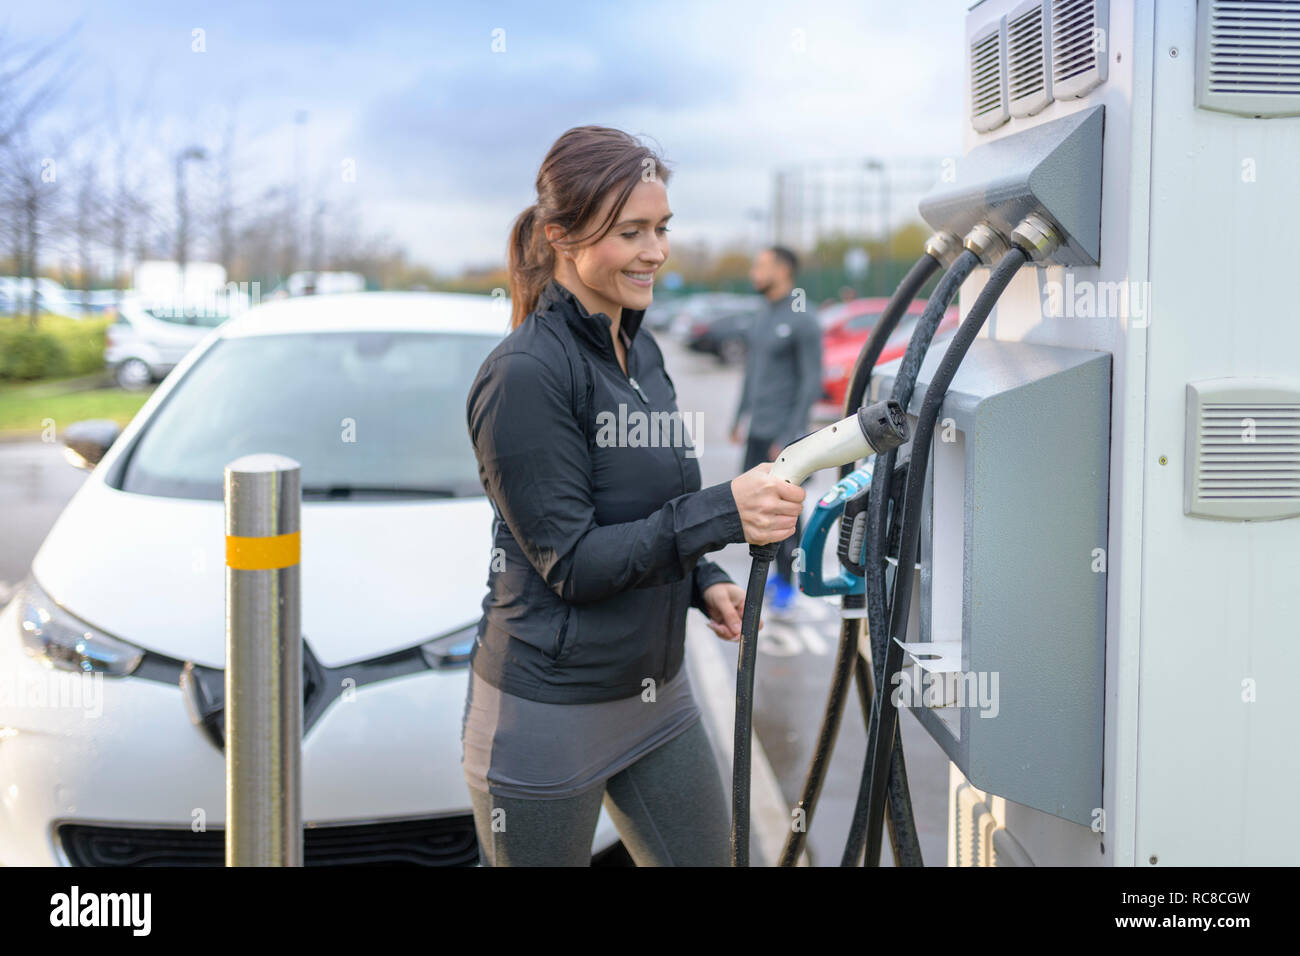 Sportswoman at electric car charging point, Manchester, UK Stock Photo